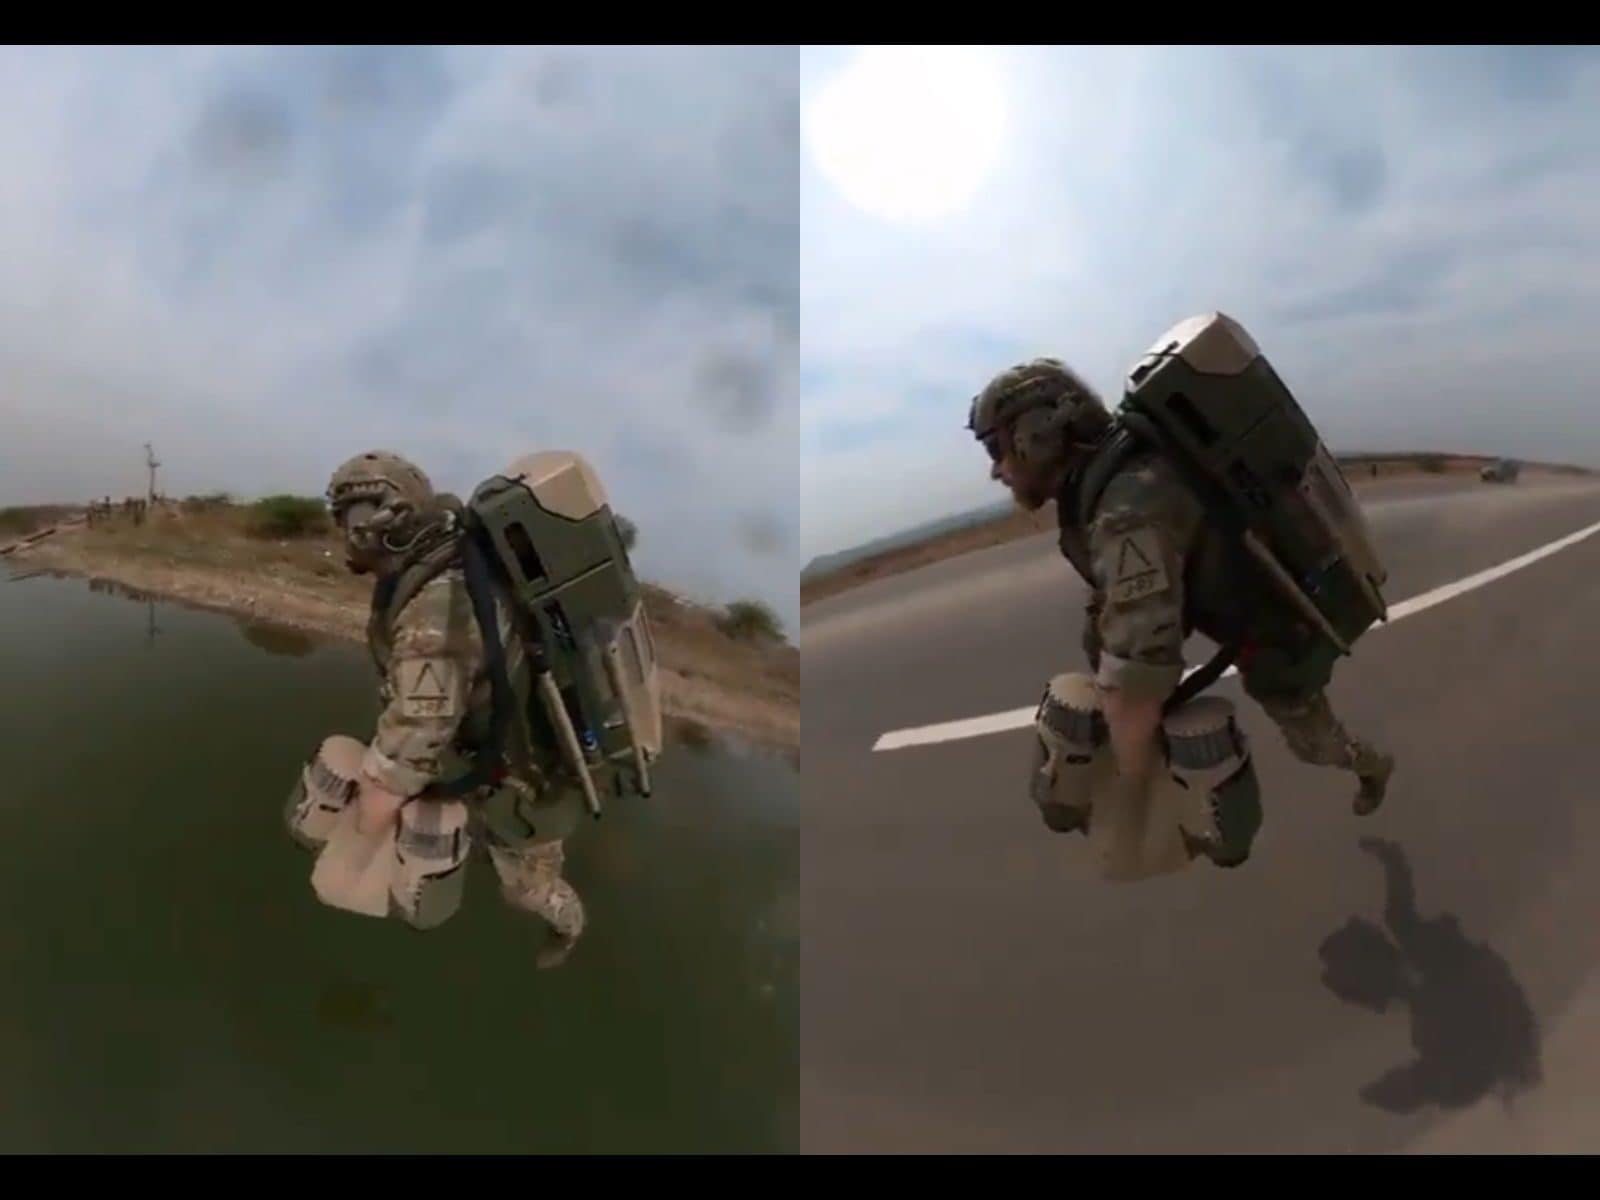 Jetpacks to the rescue? UK company tests tech for use in emergency response